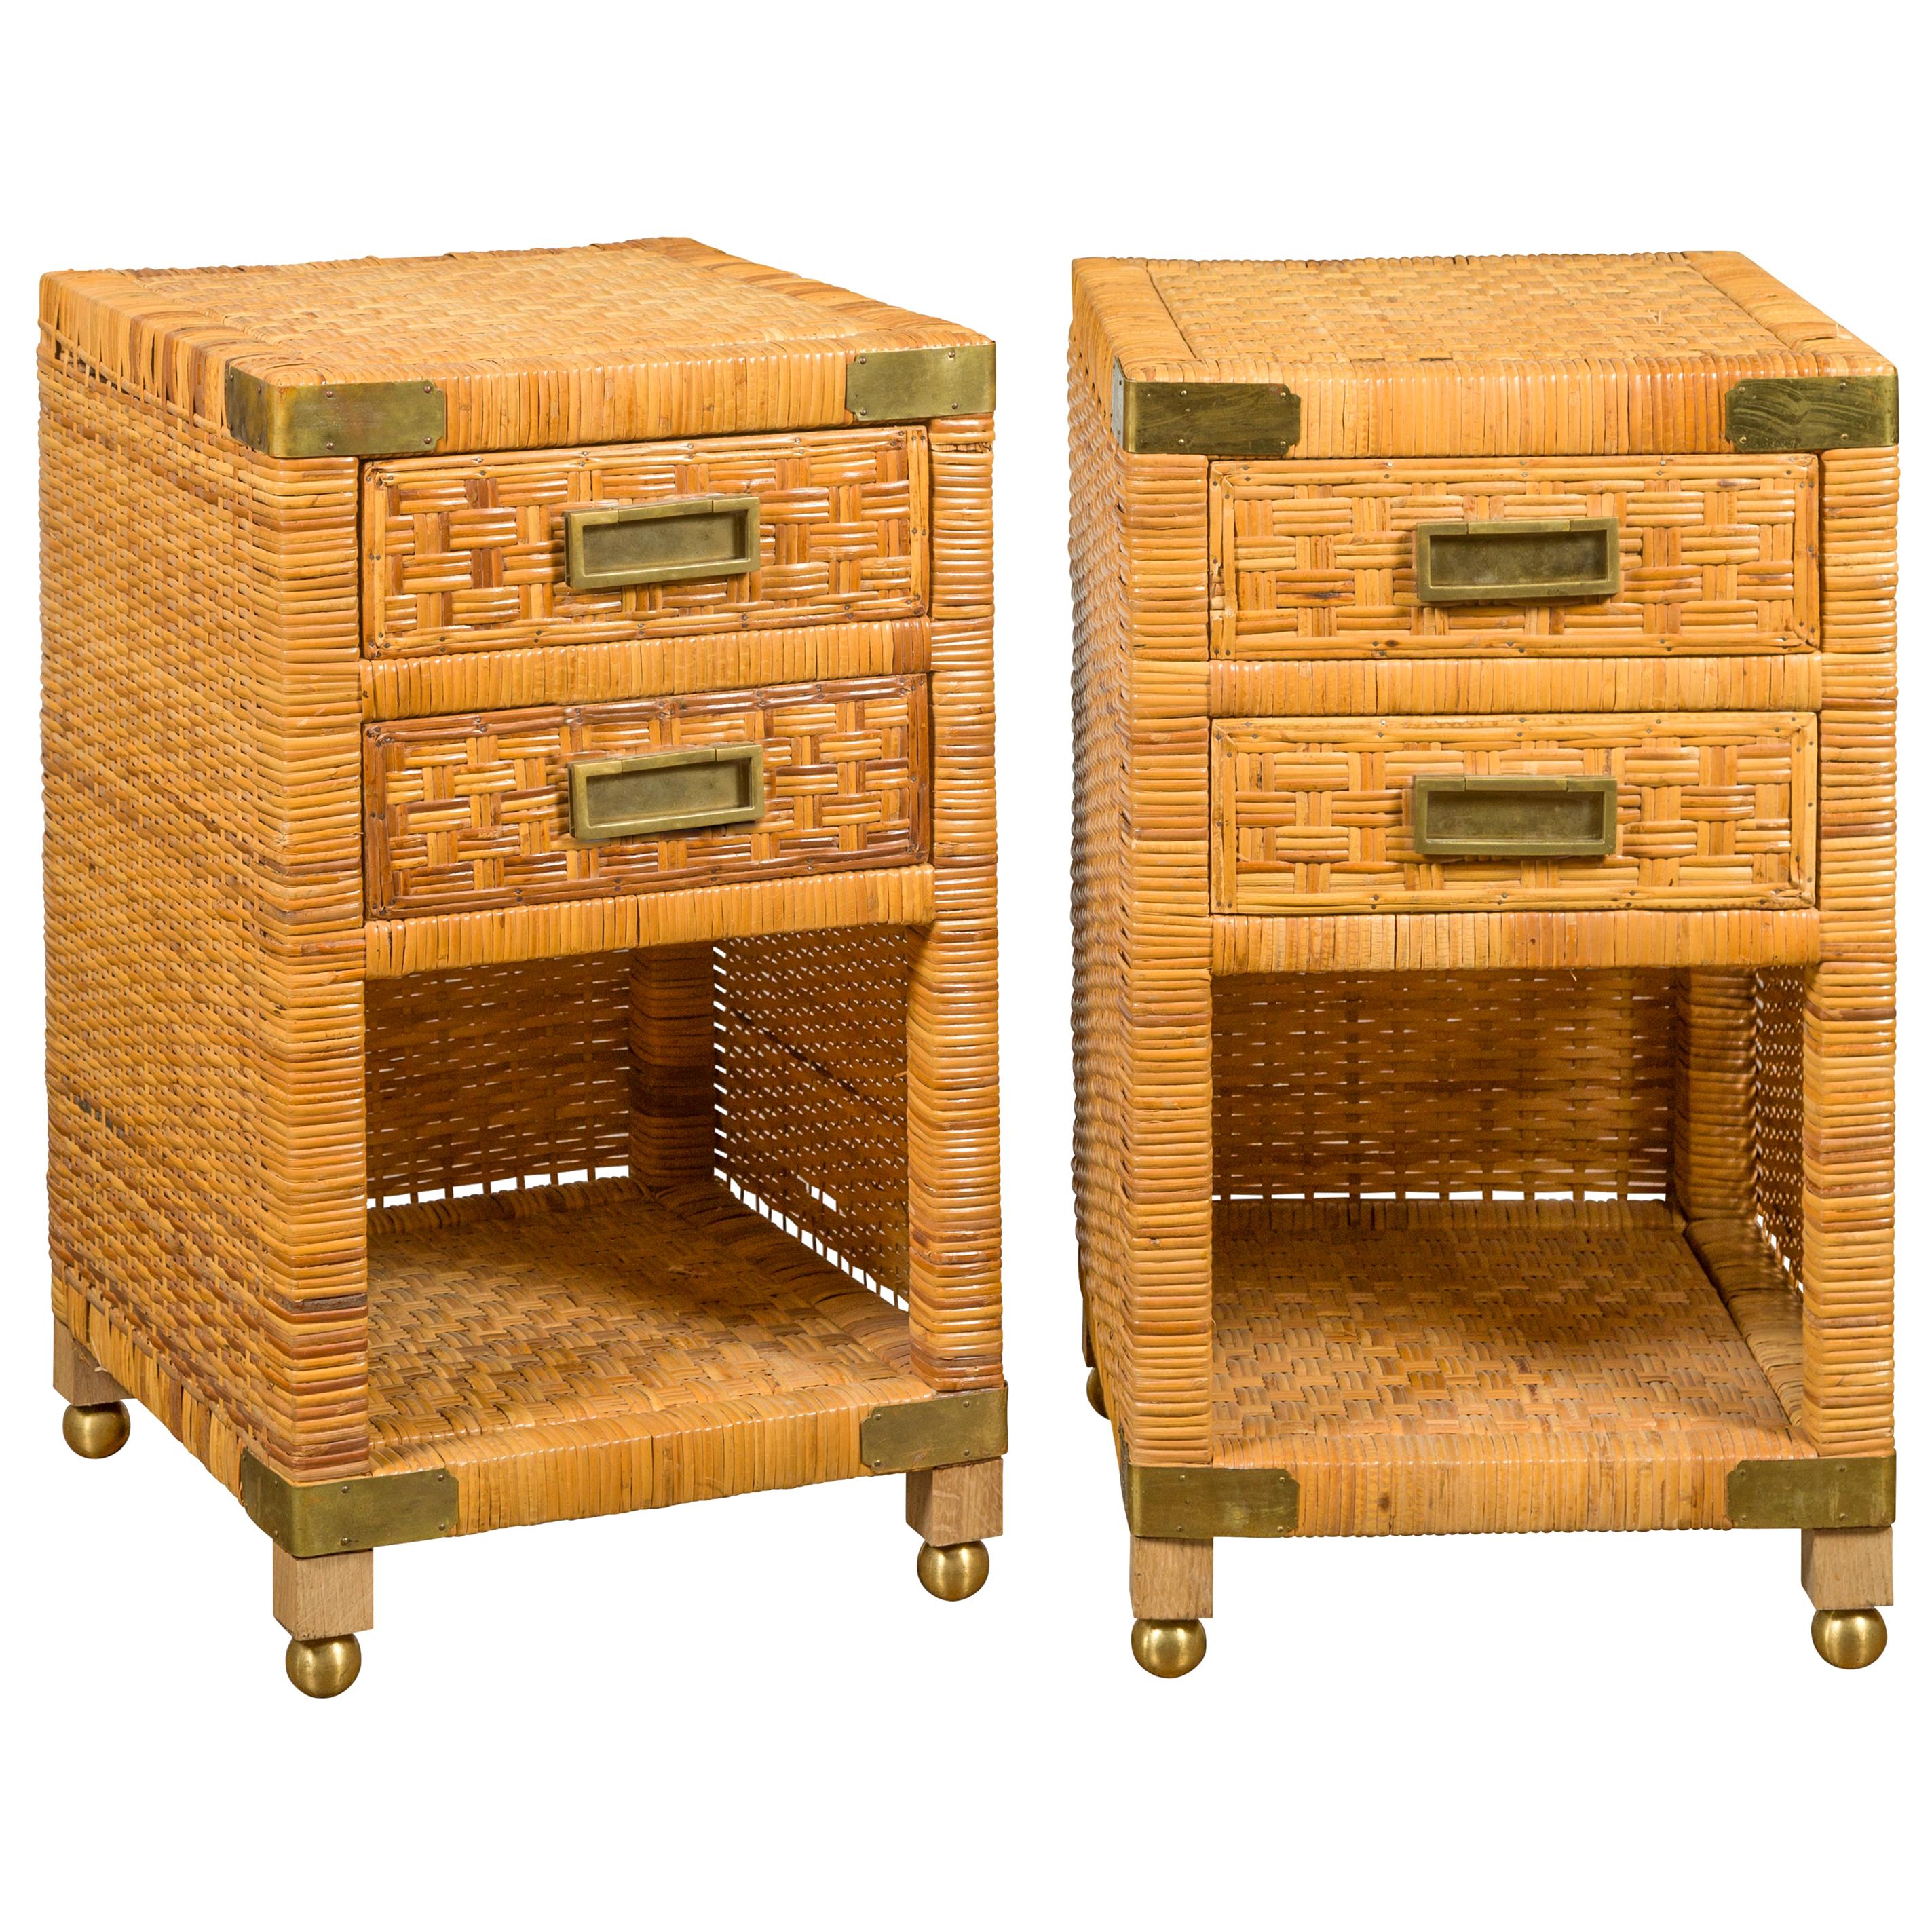 Pair of Midcentury Asian Rattan Bedside Tables with Drawers and Brass Accents